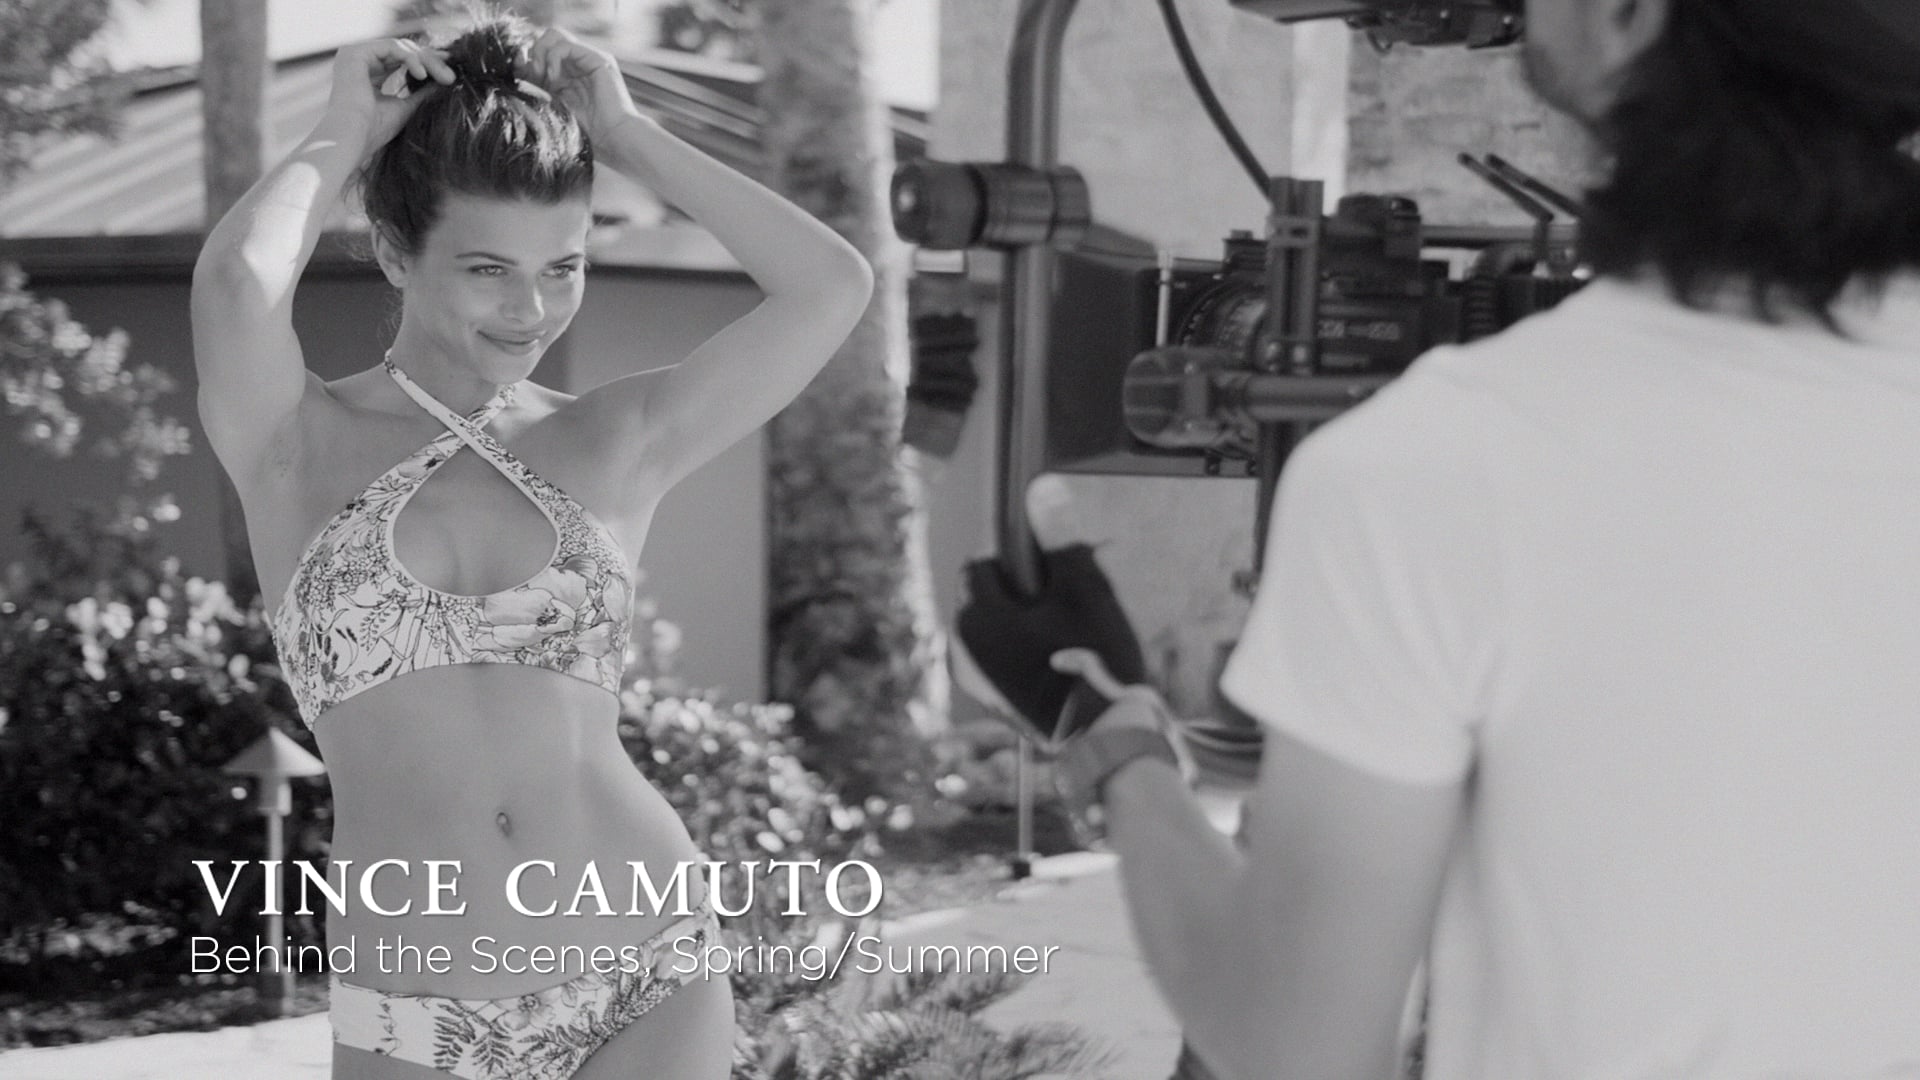 Behind the Scenes on the Vince Camuto Spring Campaign